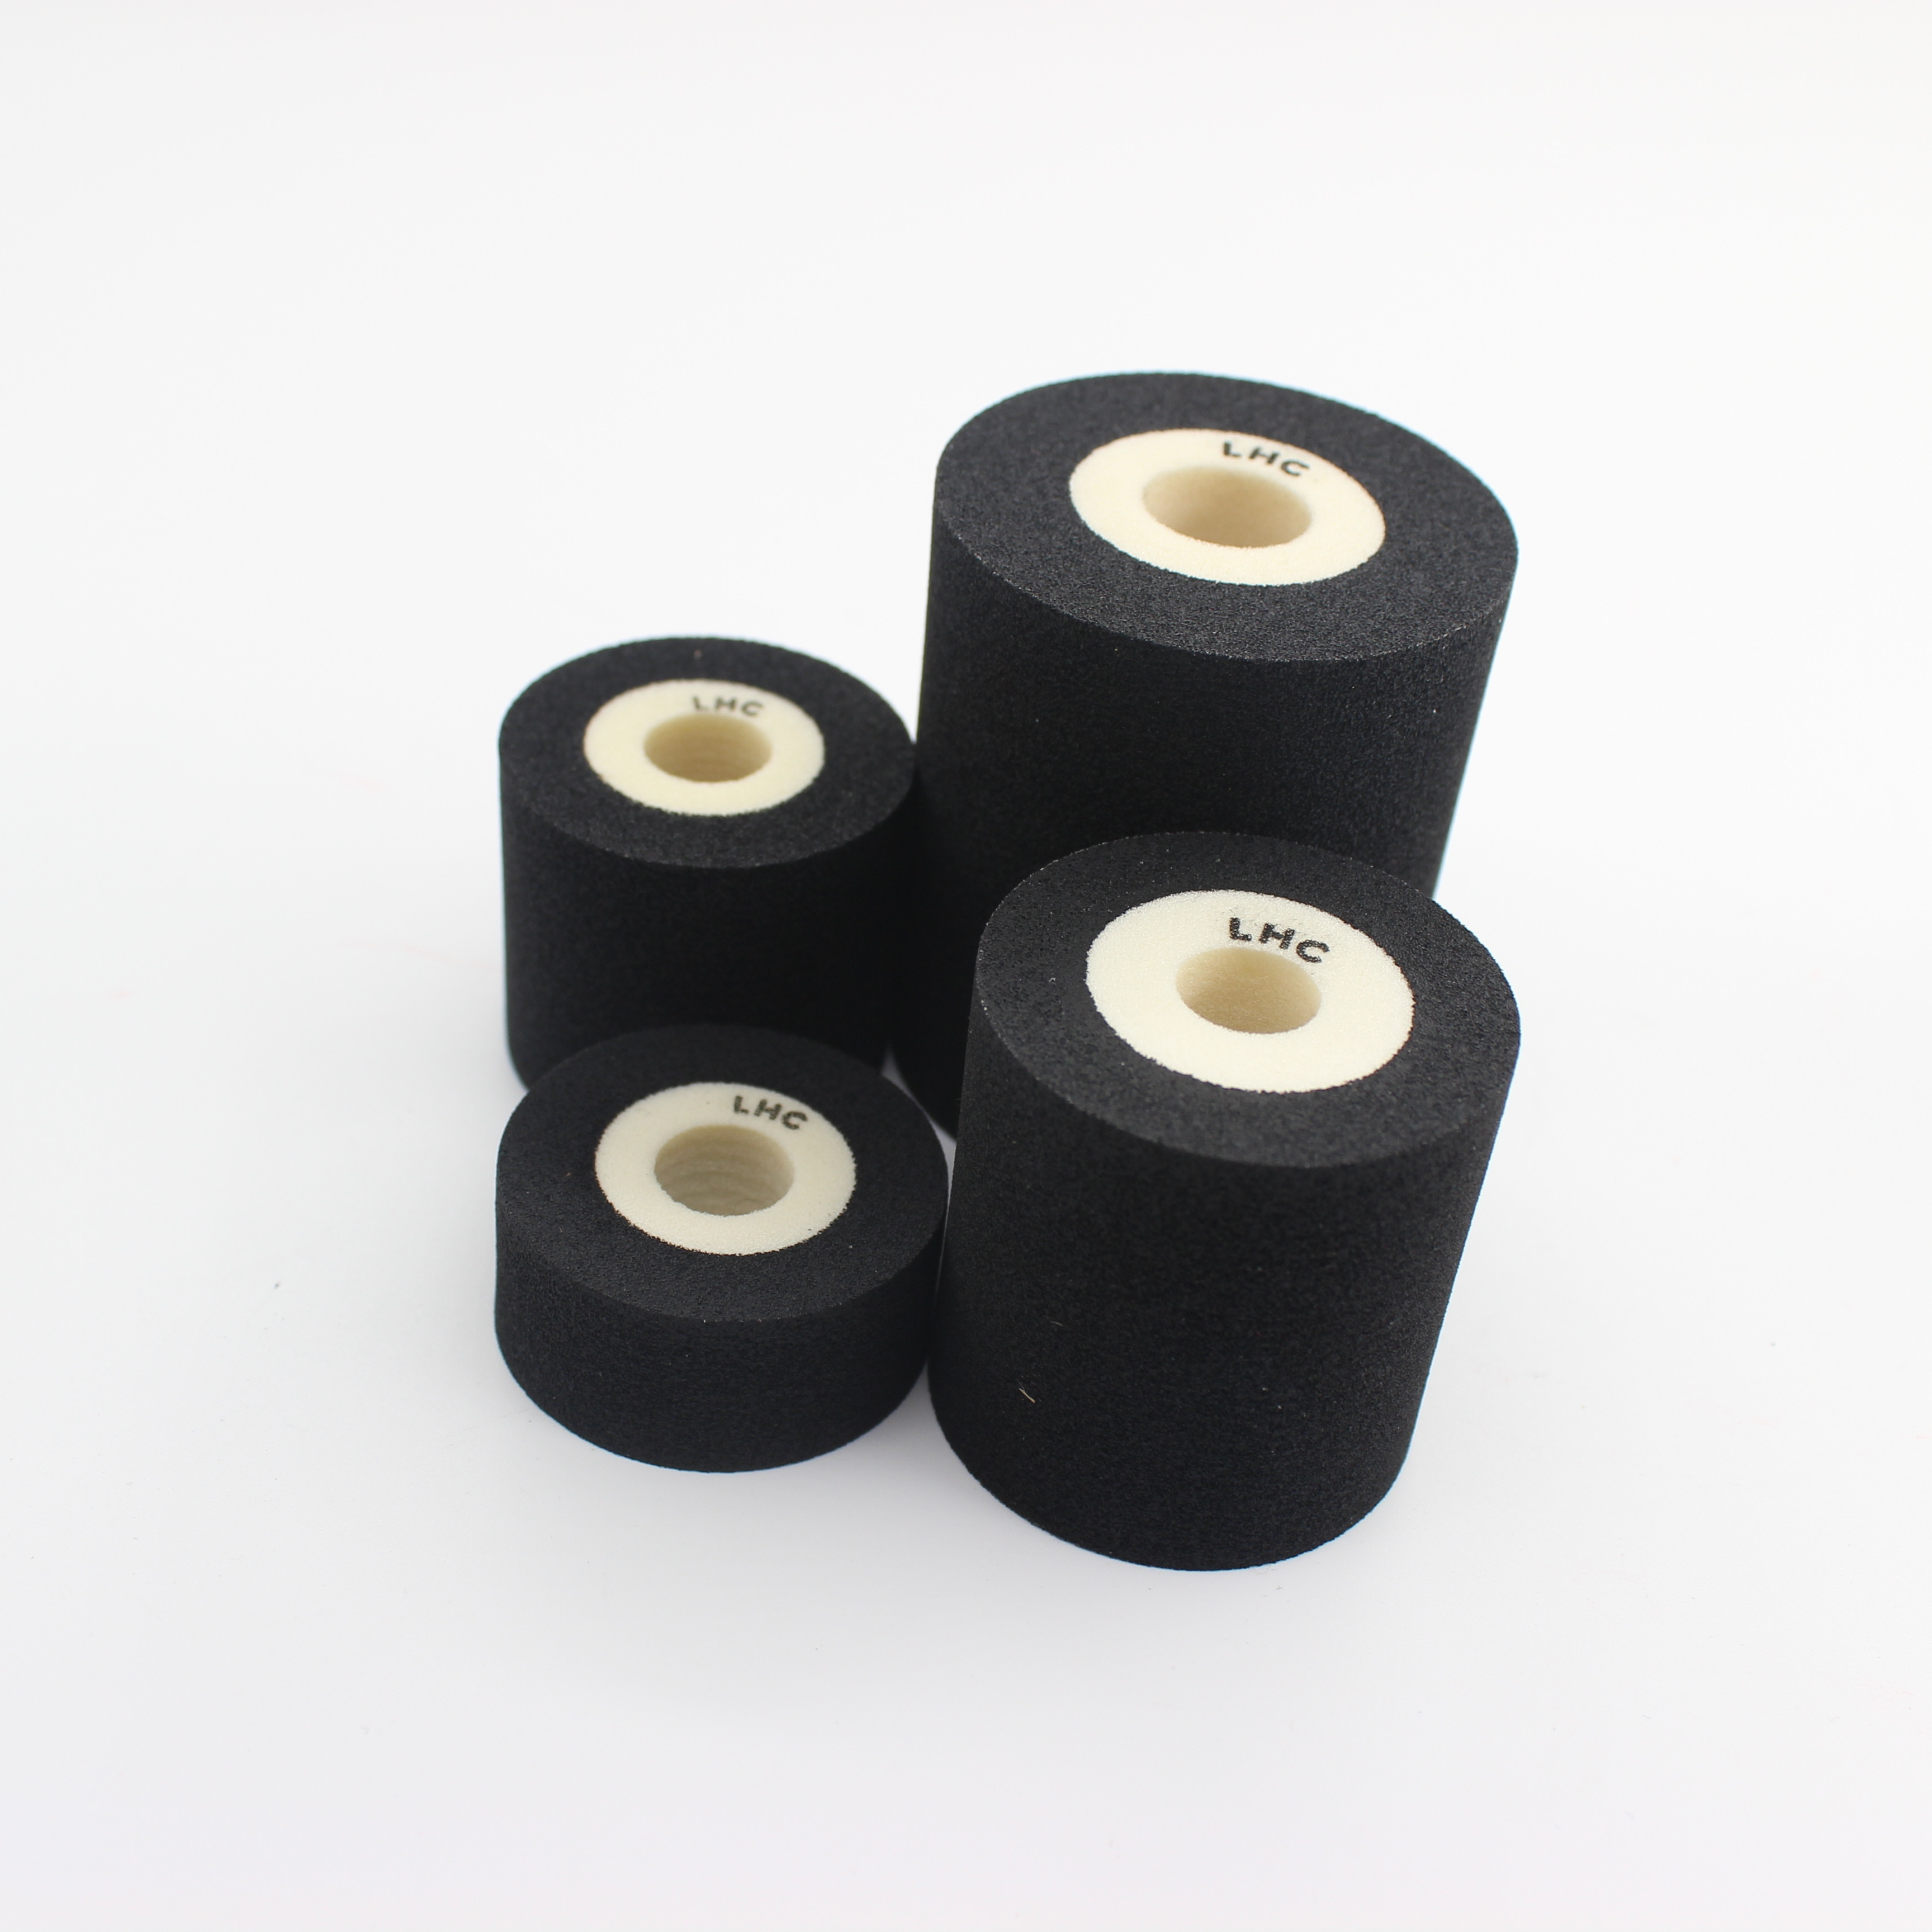 36mm 32mm Length Stamp Ink Roller adhesive For Expiration Code